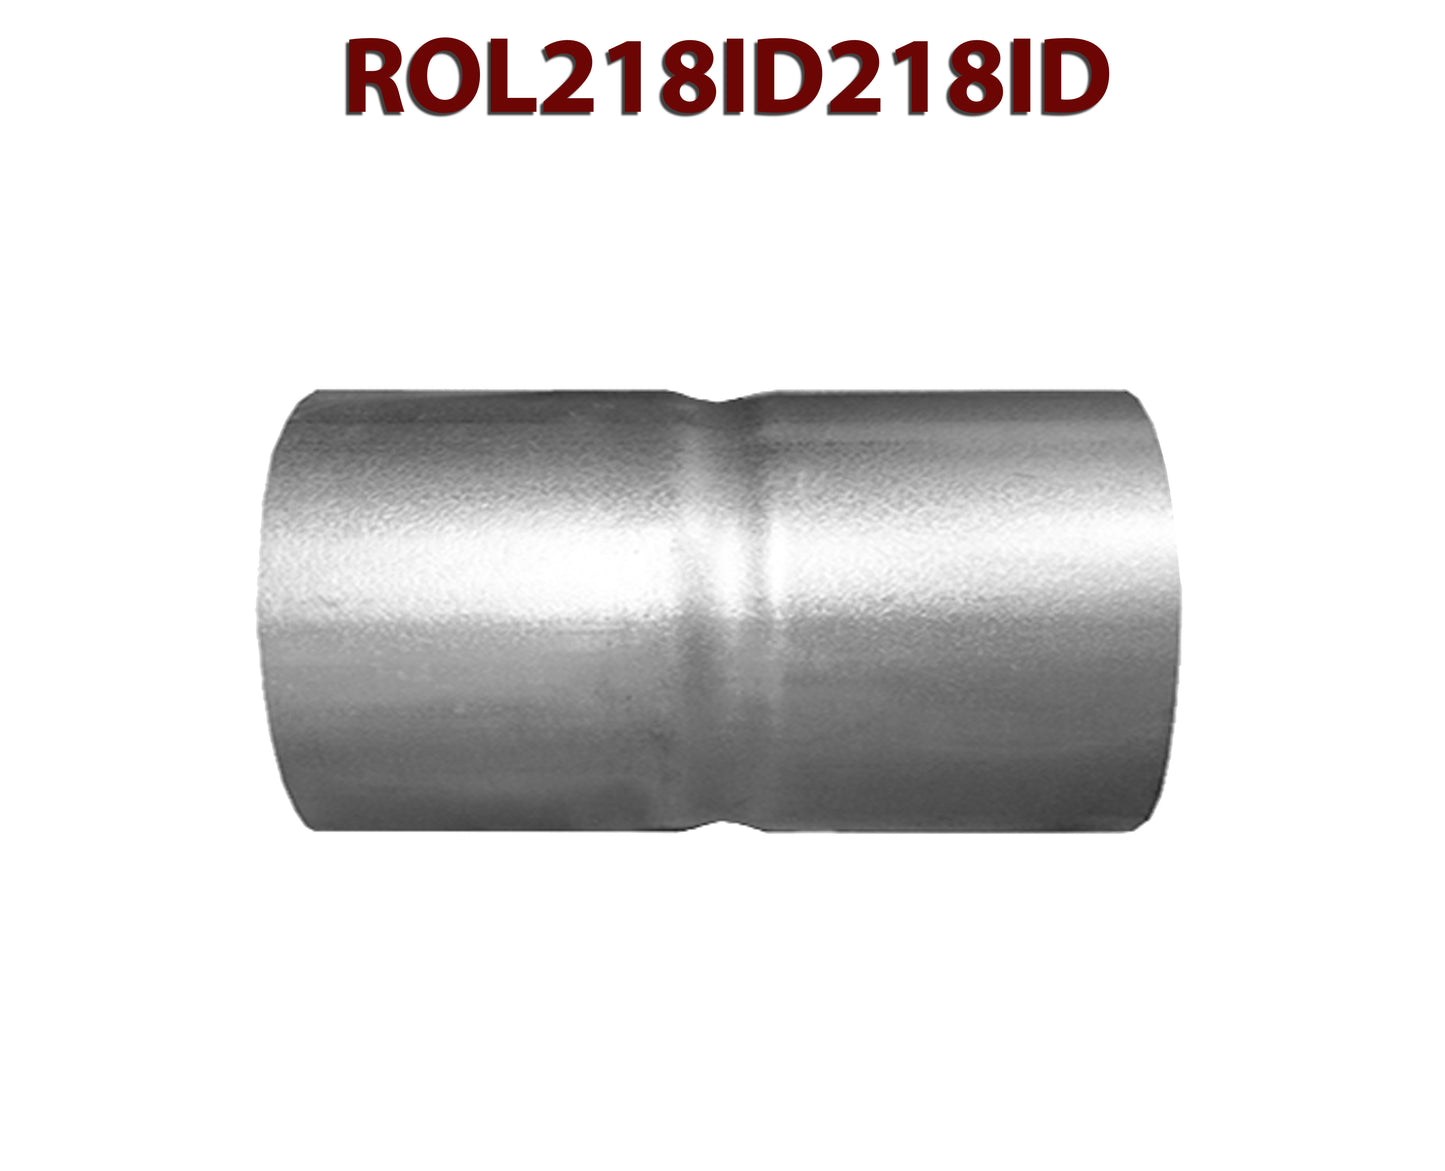 ROL218ID218ID 548510 2 1/8” ID to 2 1/8” ID Universal Exhaust Pipe to Pipe Coupling Connector